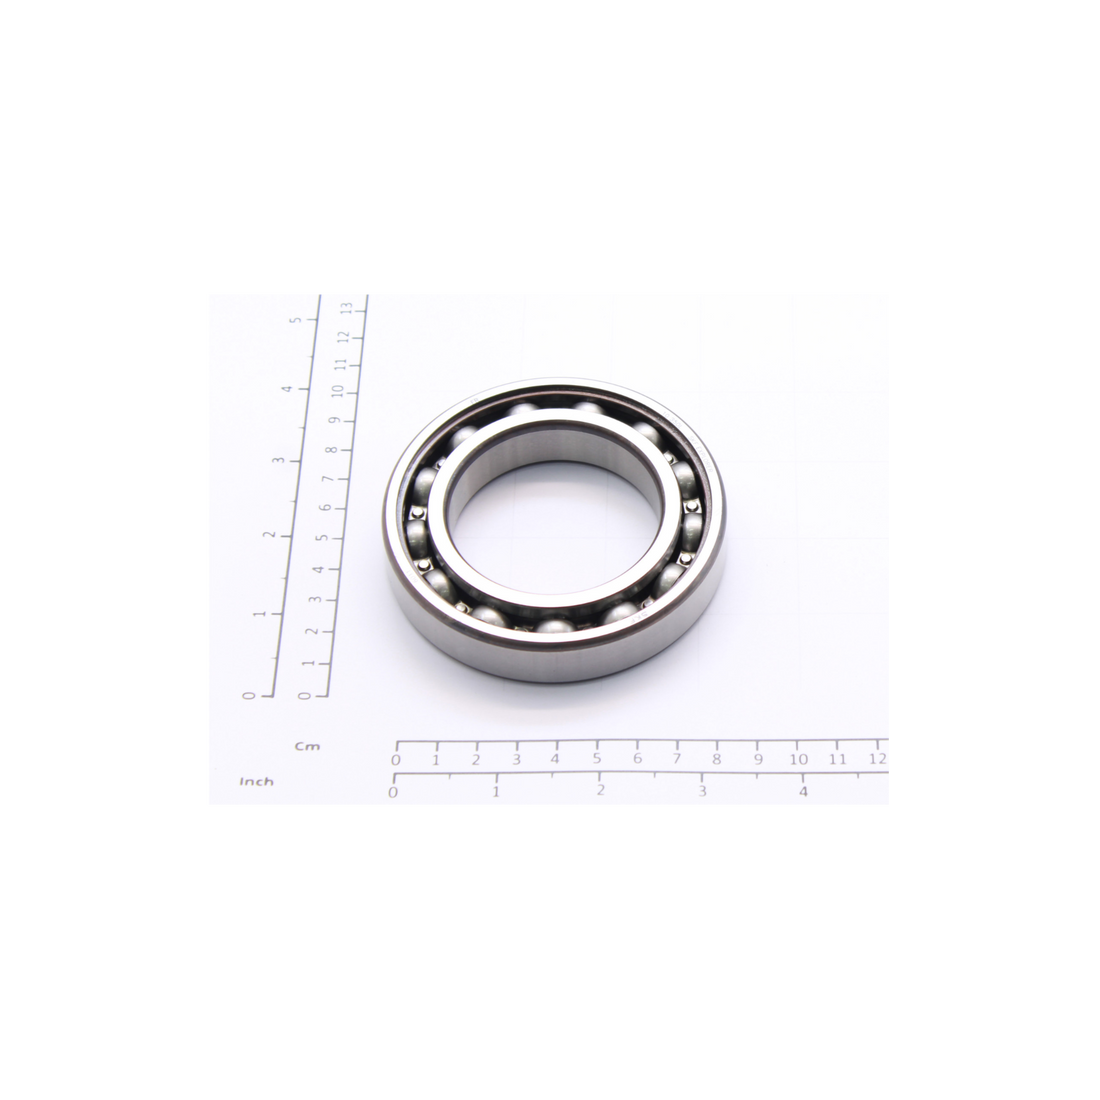 R&M Parts - Deep Groove Ball Bearing, Part Number: 6300101110